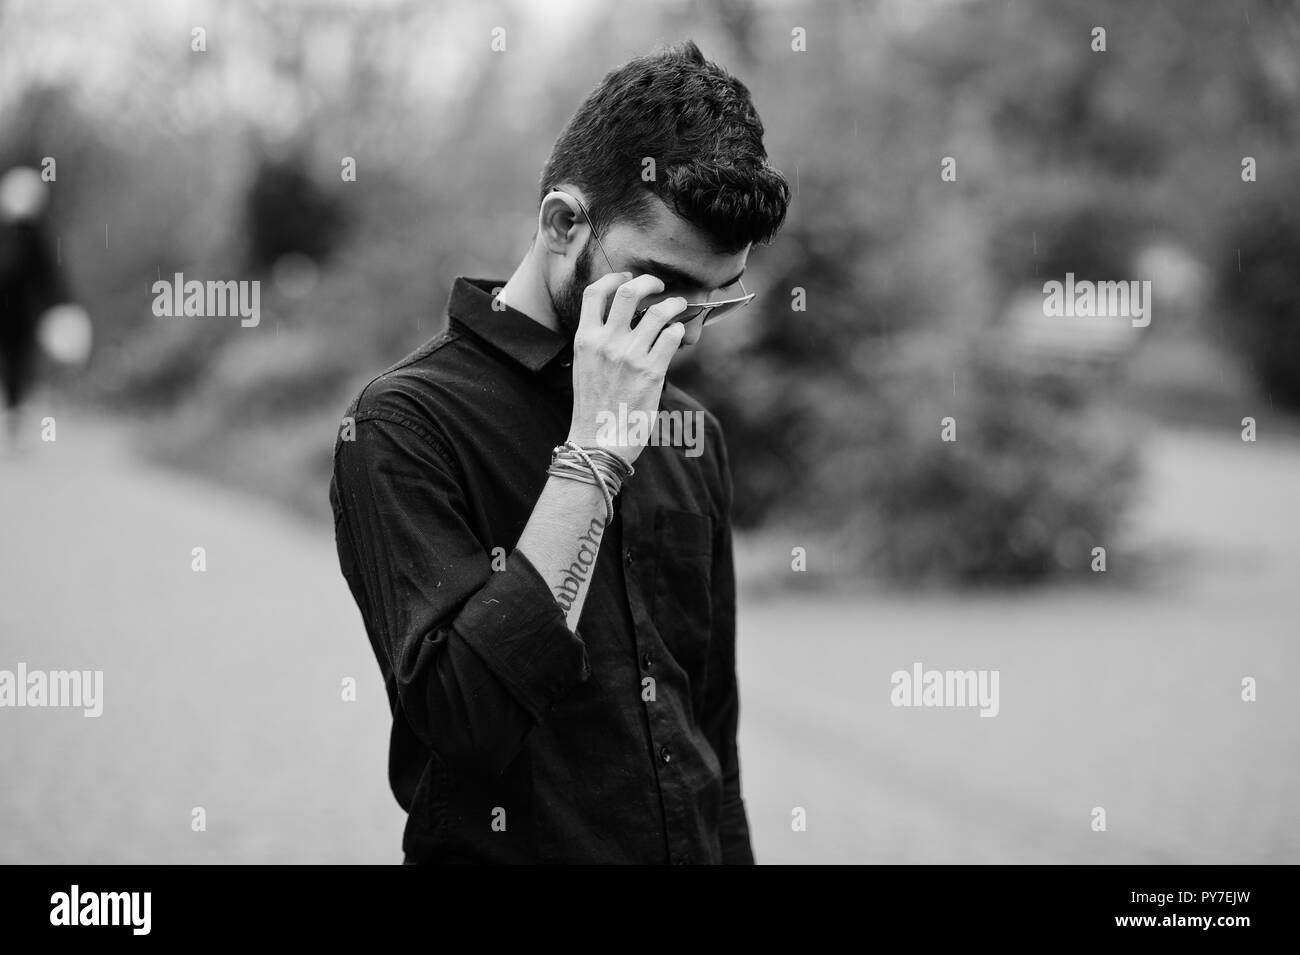 Indian stylish man at black shirt and sunglasses posed outdoor. Black and white photo. Stock Photo